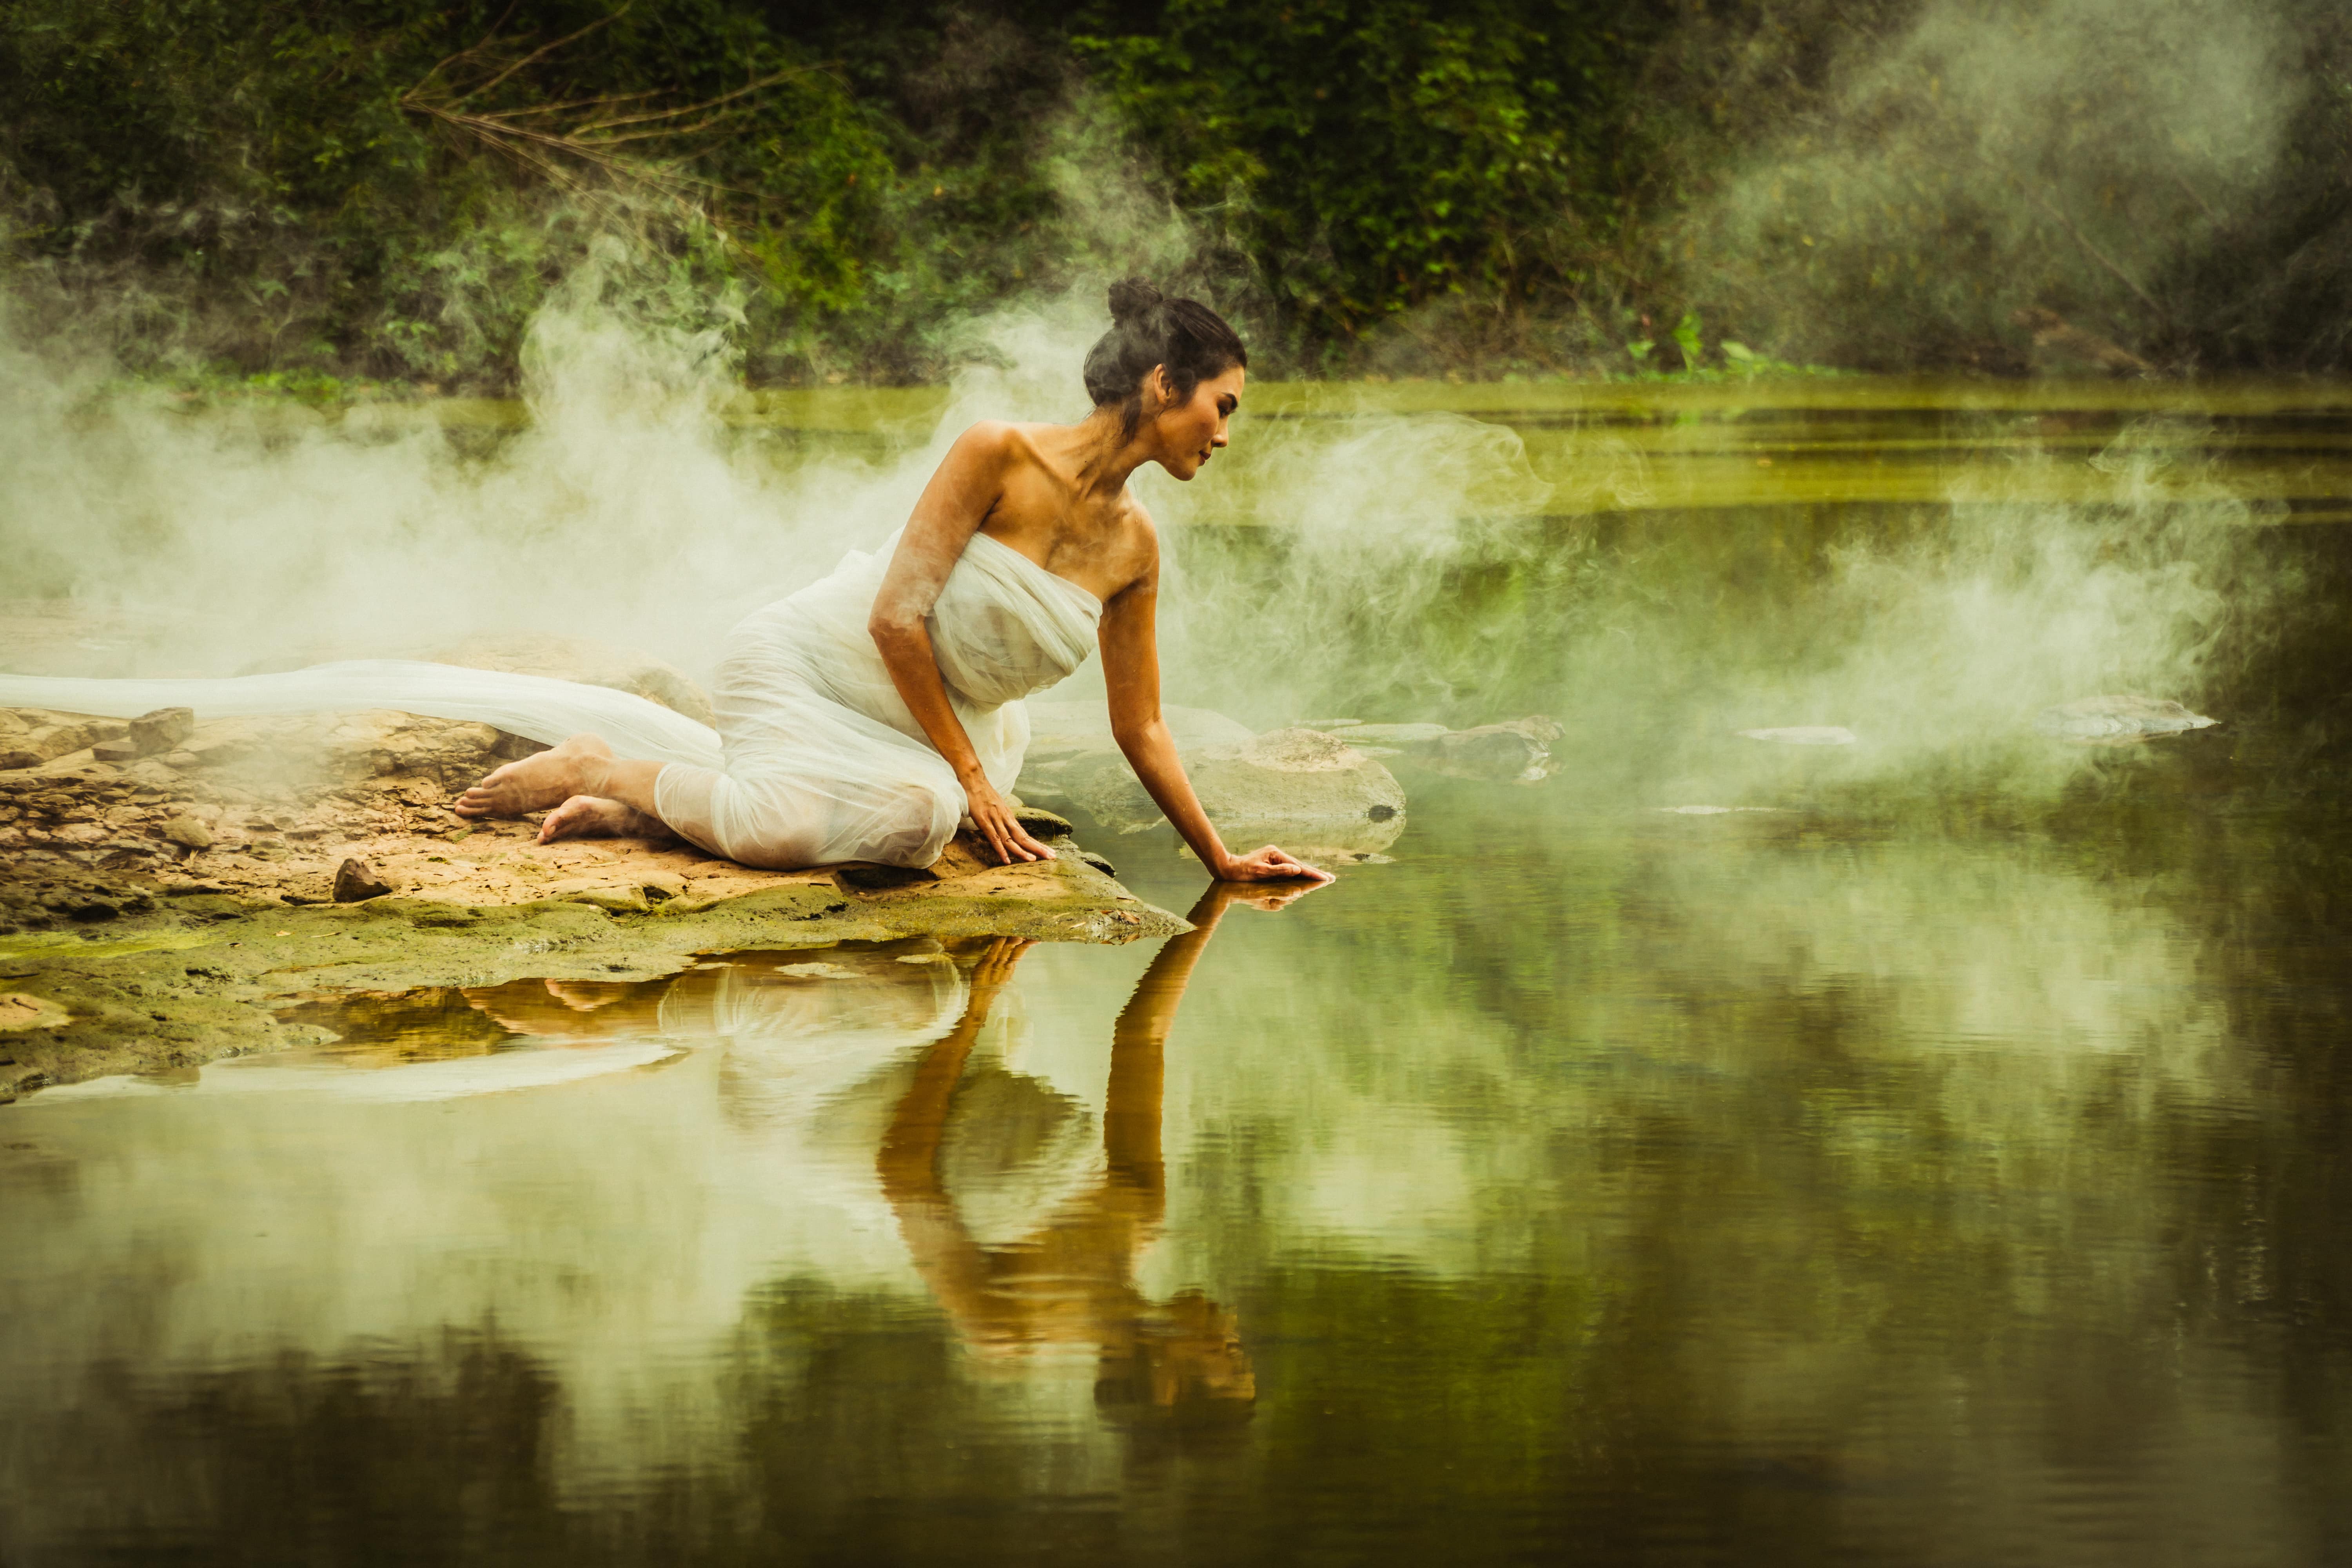 enchanting woman sitting on the ground by the misty river